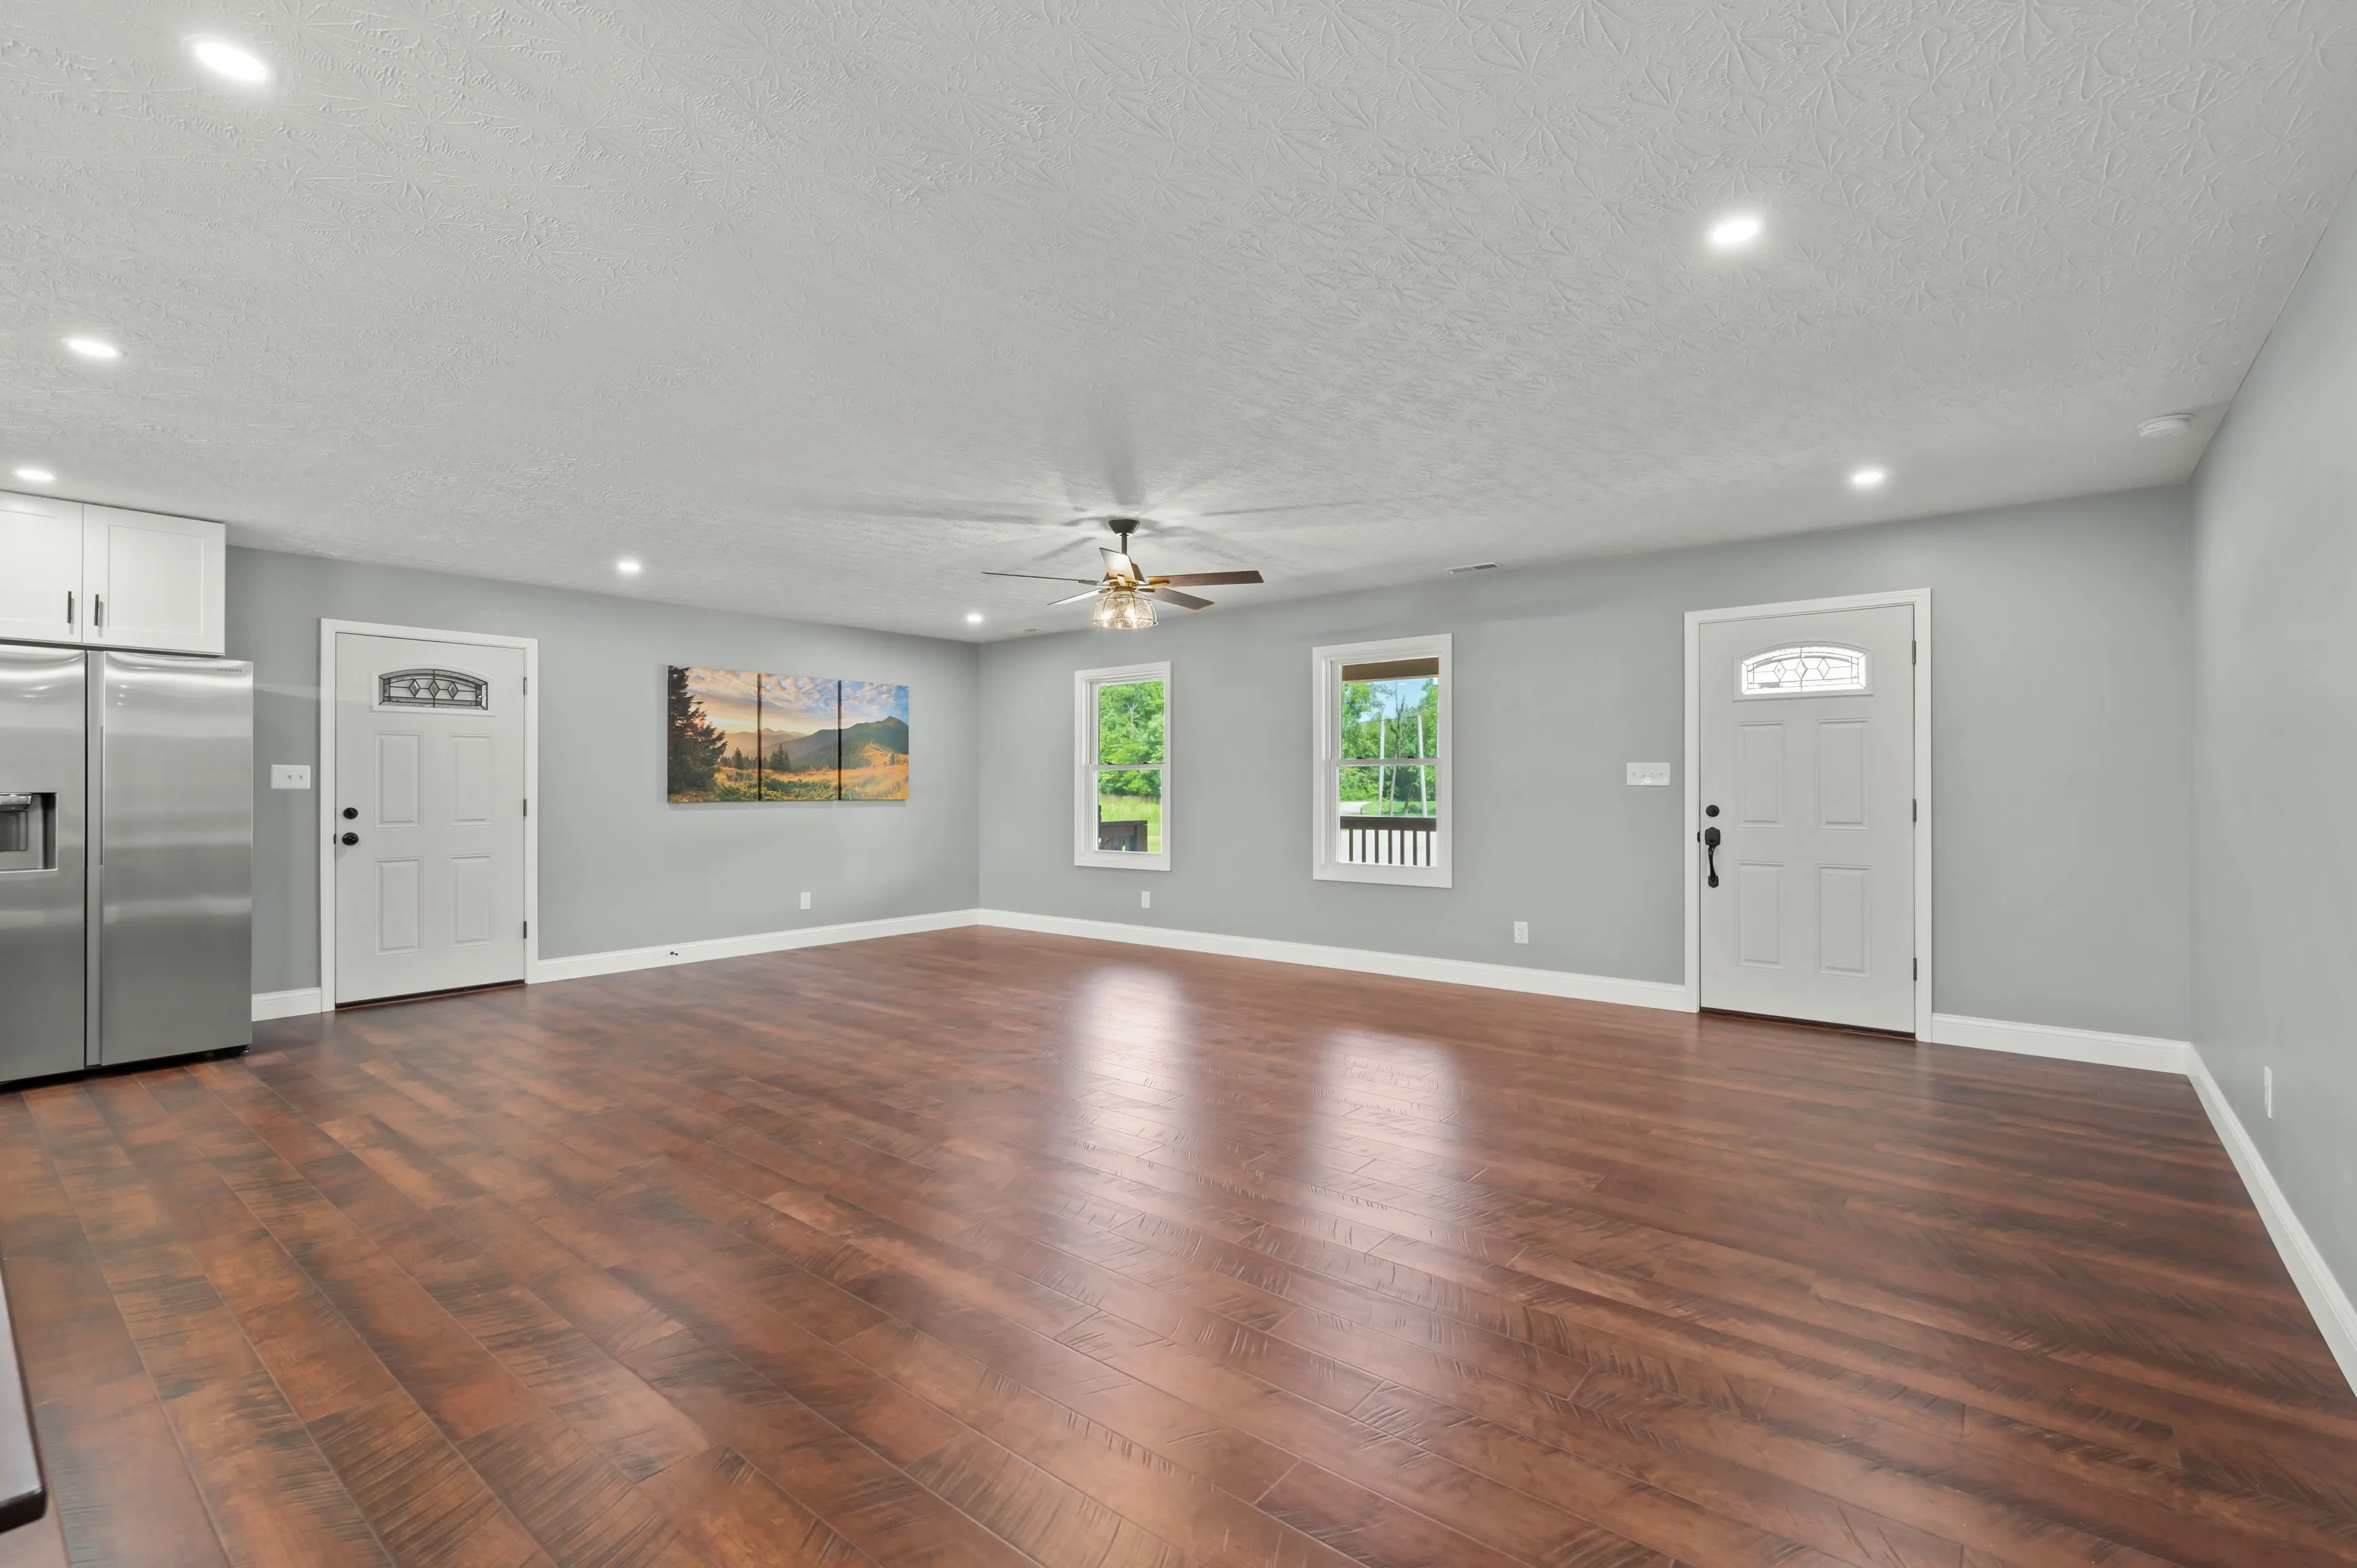 Spacious modern room with polished hardwood floors, gray walls, white doors, a ceiling fan, and a framed landscape painting.